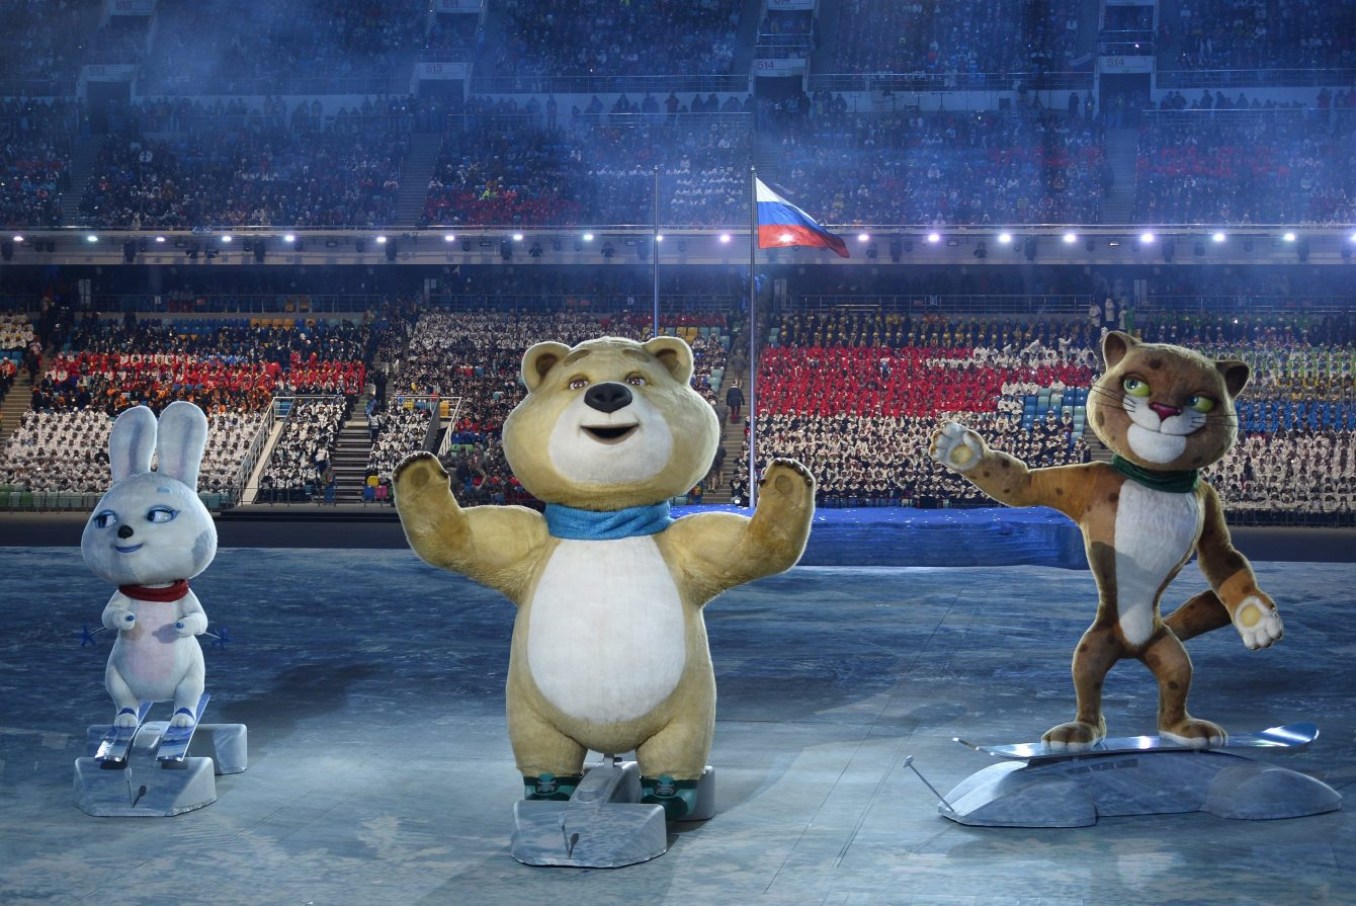 The 2014 Winter Olympic games official mascots, the Leopard, the Polar Bear, and the Hare, perform during the opening ceremony of the 2014 Winter Olympics in Sochi, Russia, Friday, Feb. 7, 2014. (AP Photo/Lionel Bonaventure, Pool)